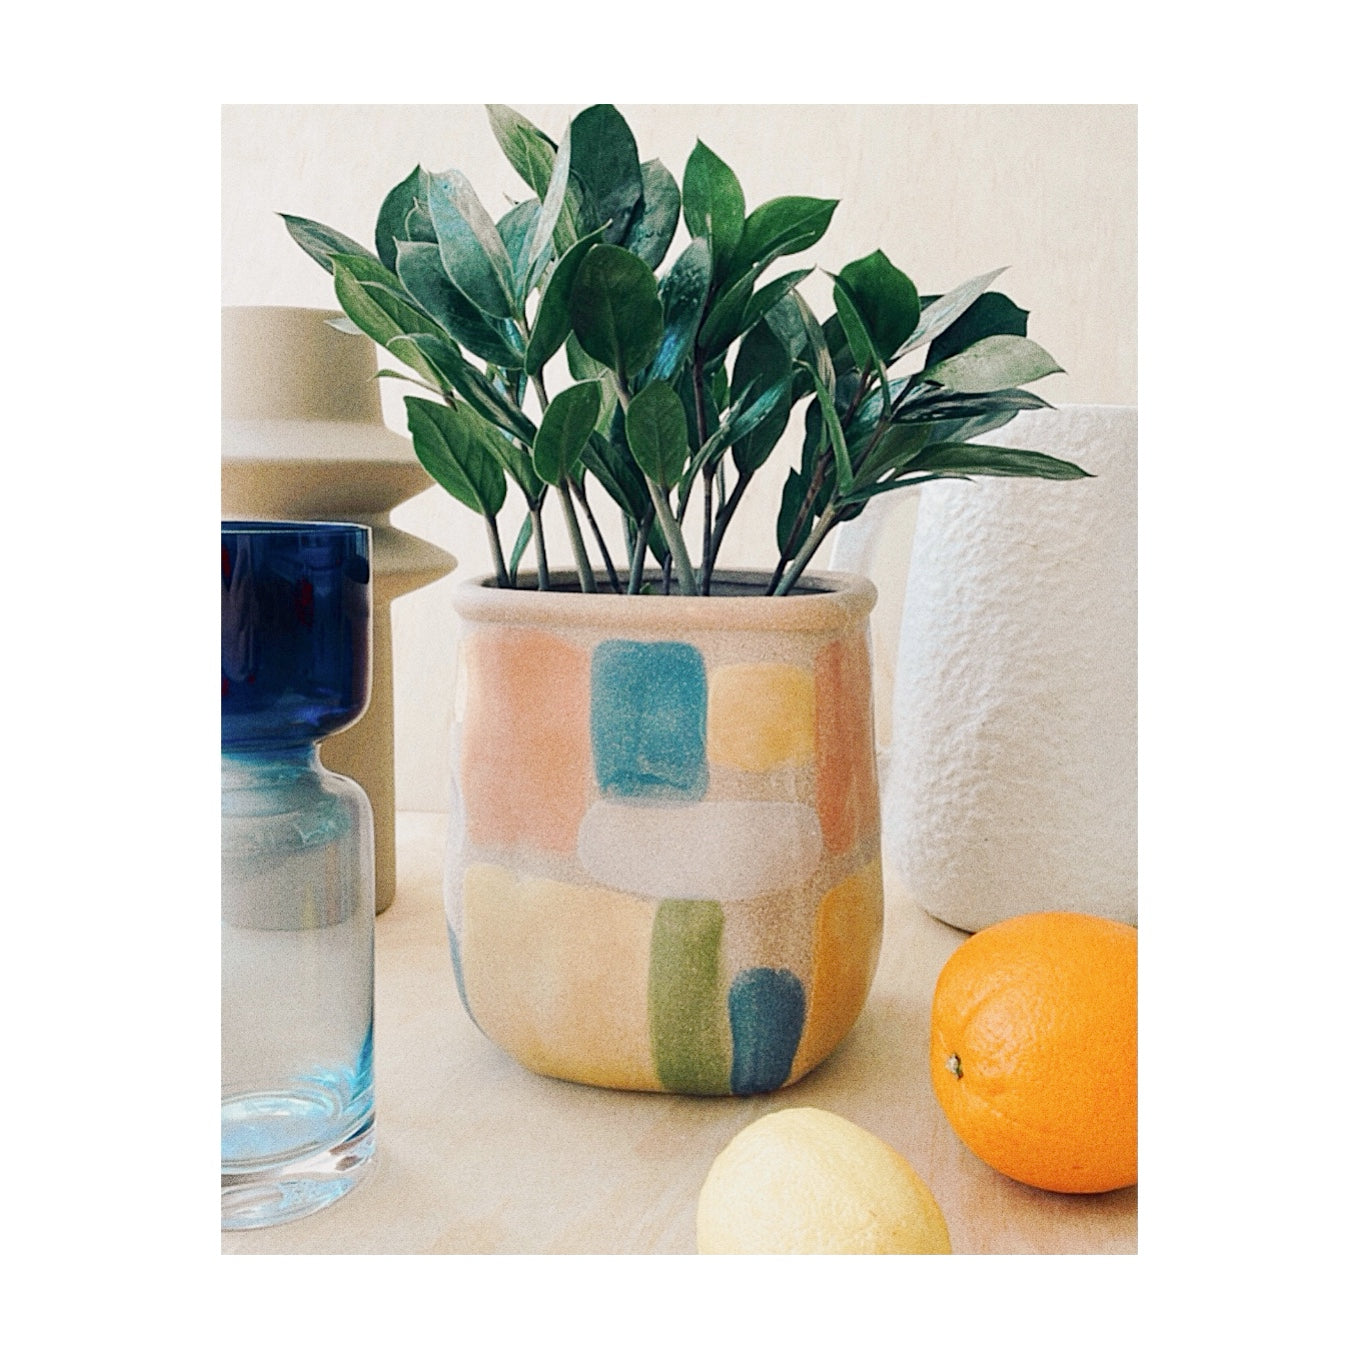 New Med Collection: Indoor Plants, pots and homewares 